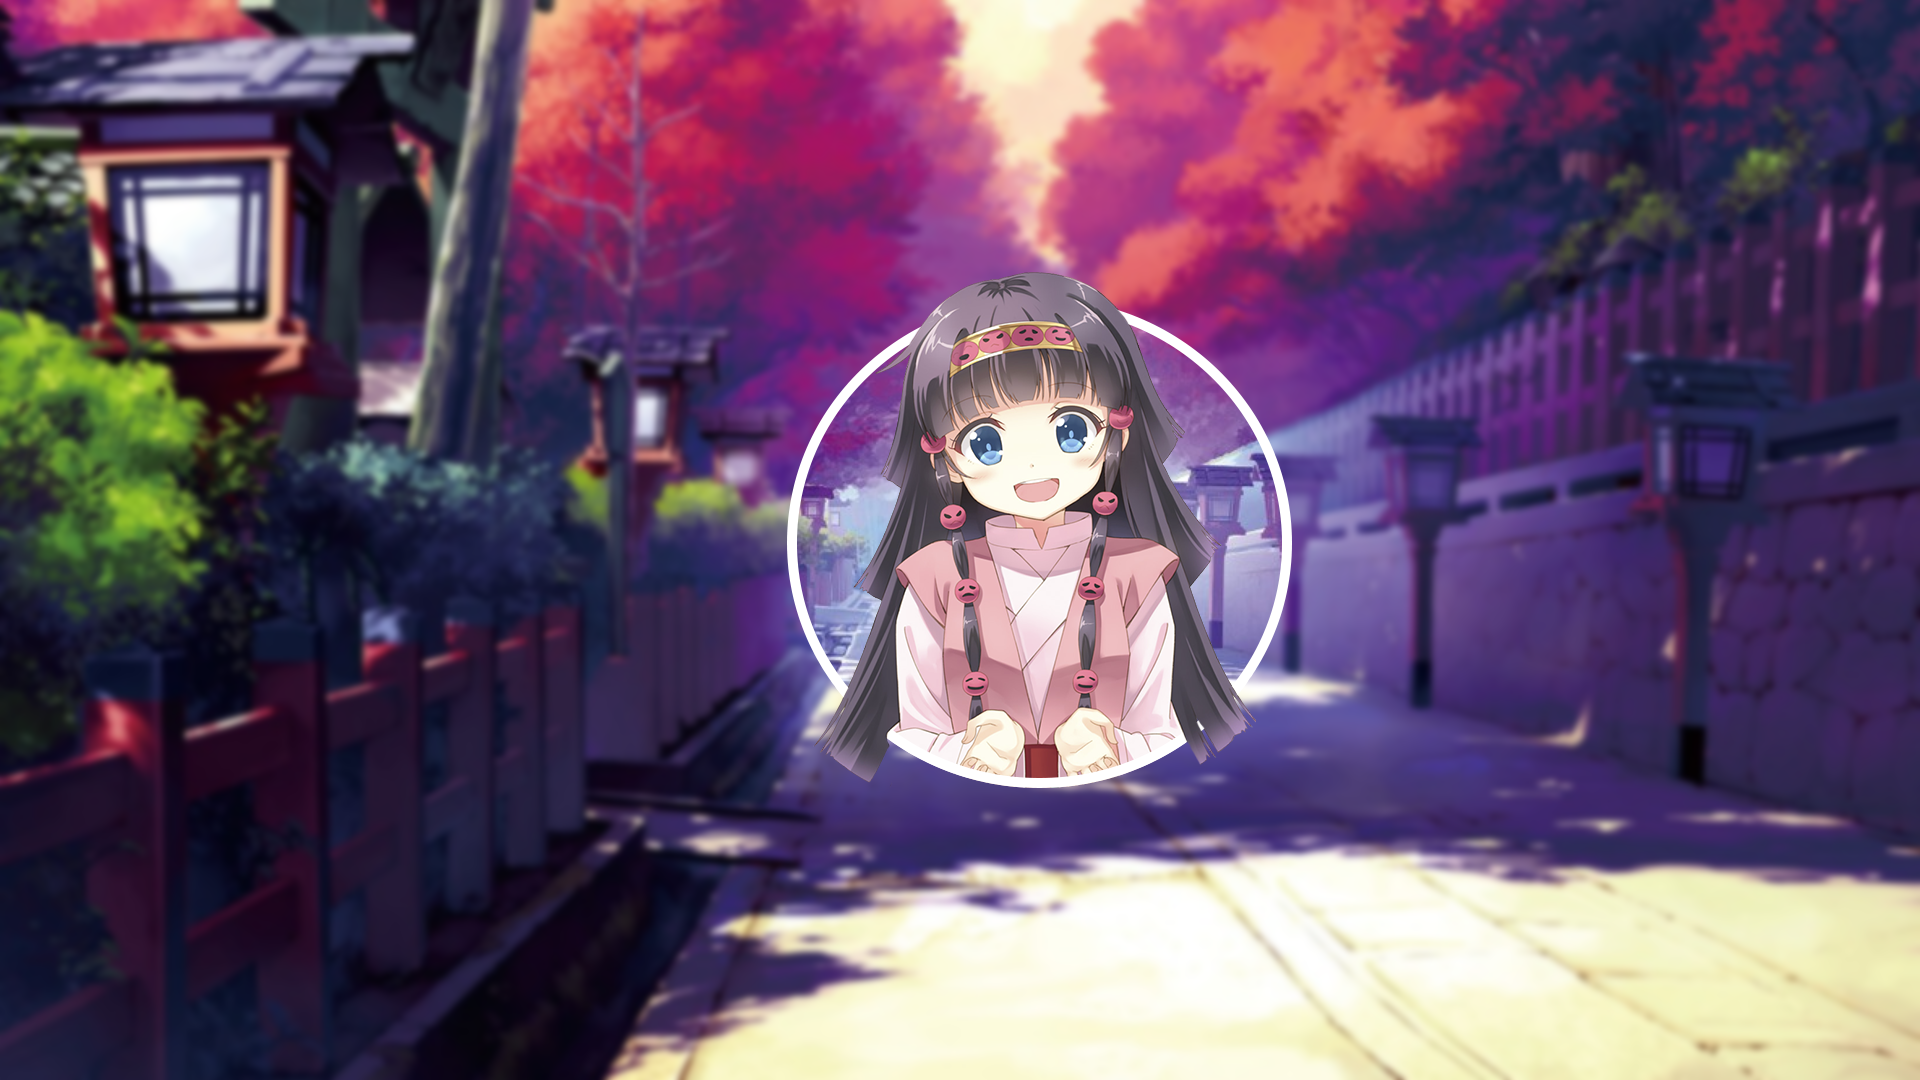 Hunter X Hunter Alluka Zoldyck Anime Blurred Render In Shapes Picture In Picture Street 1920x1080